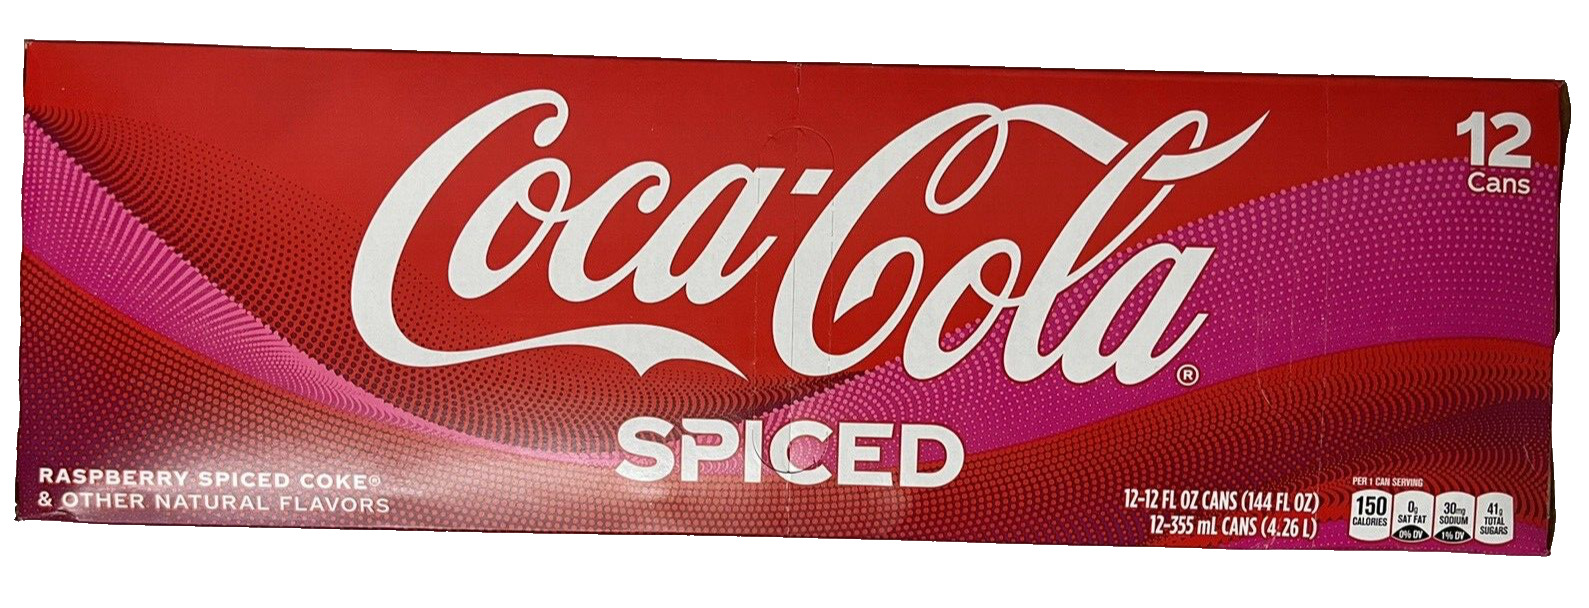 NEW COCA-COLA RASPBERRY SPICED FLAVORED SODA 12 PACK 12 FLOZ (355mL) CANS BUY IT